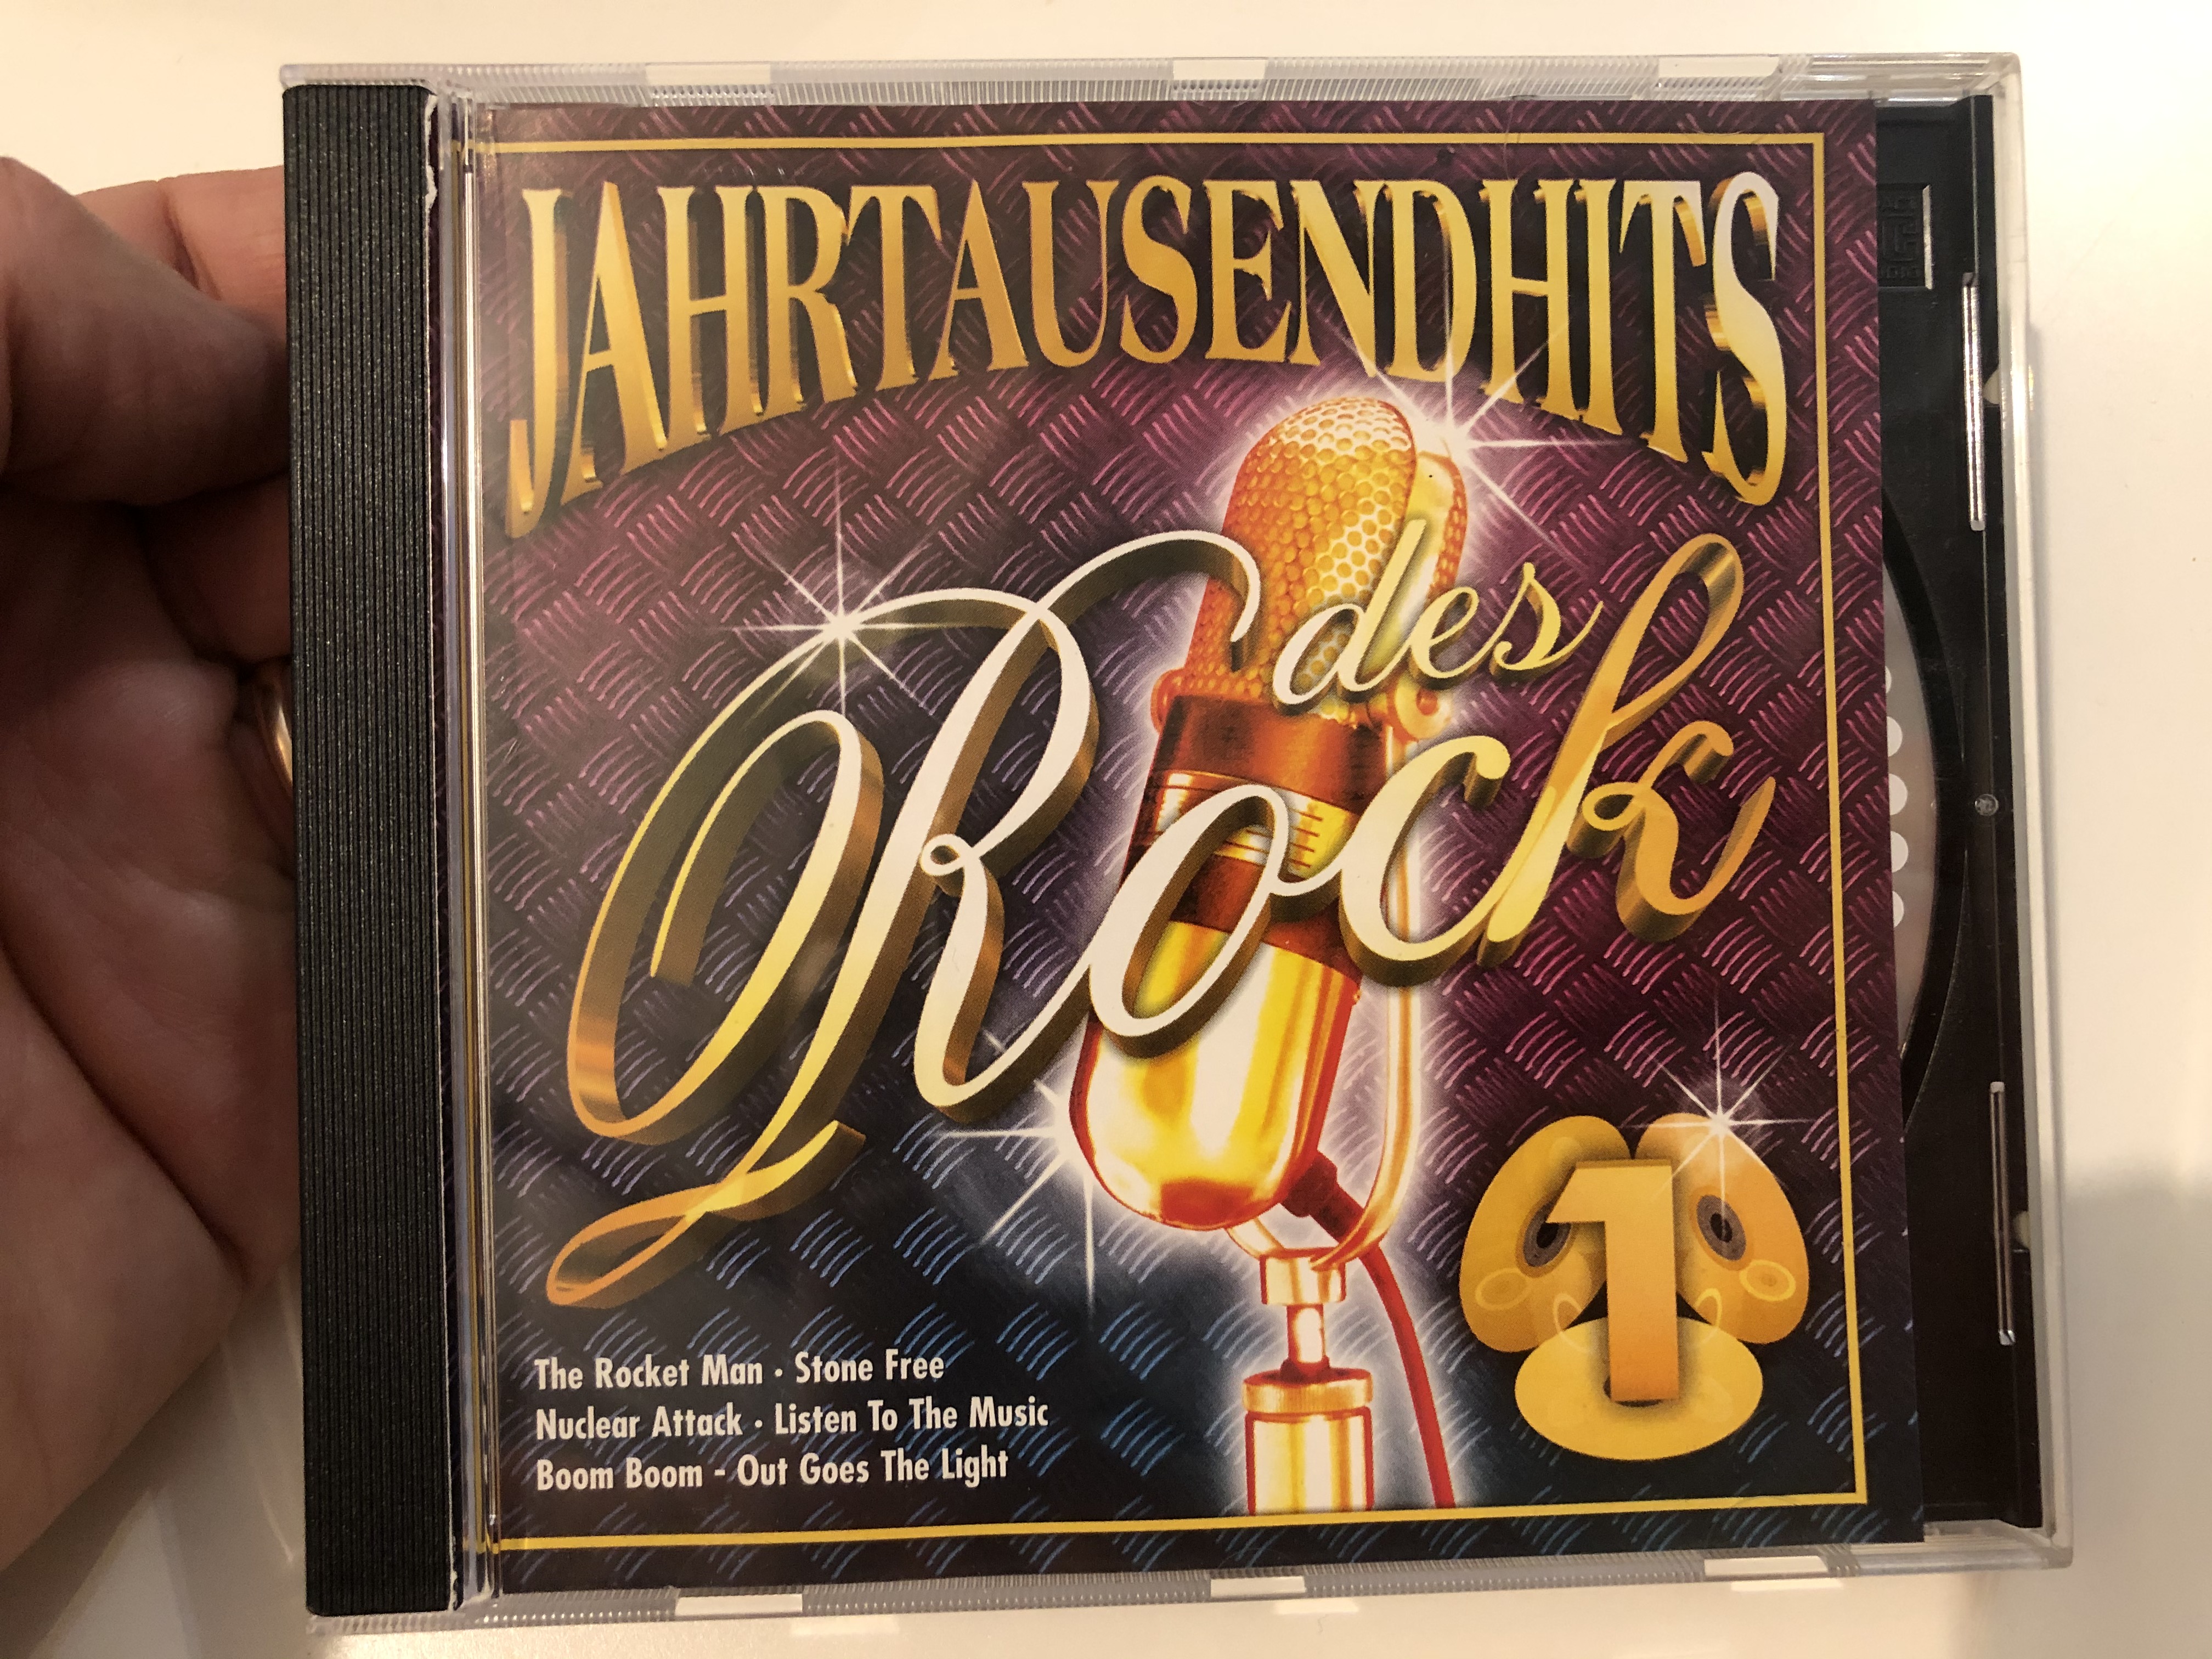 jahrtausendhits-des-rock-1-the-rocket-man-stone-free-nuclear-attack-listen-to-the-music-boom-boom-out-goes-the-light-eurotrend-audio-cd-cd-154-1-.jpg